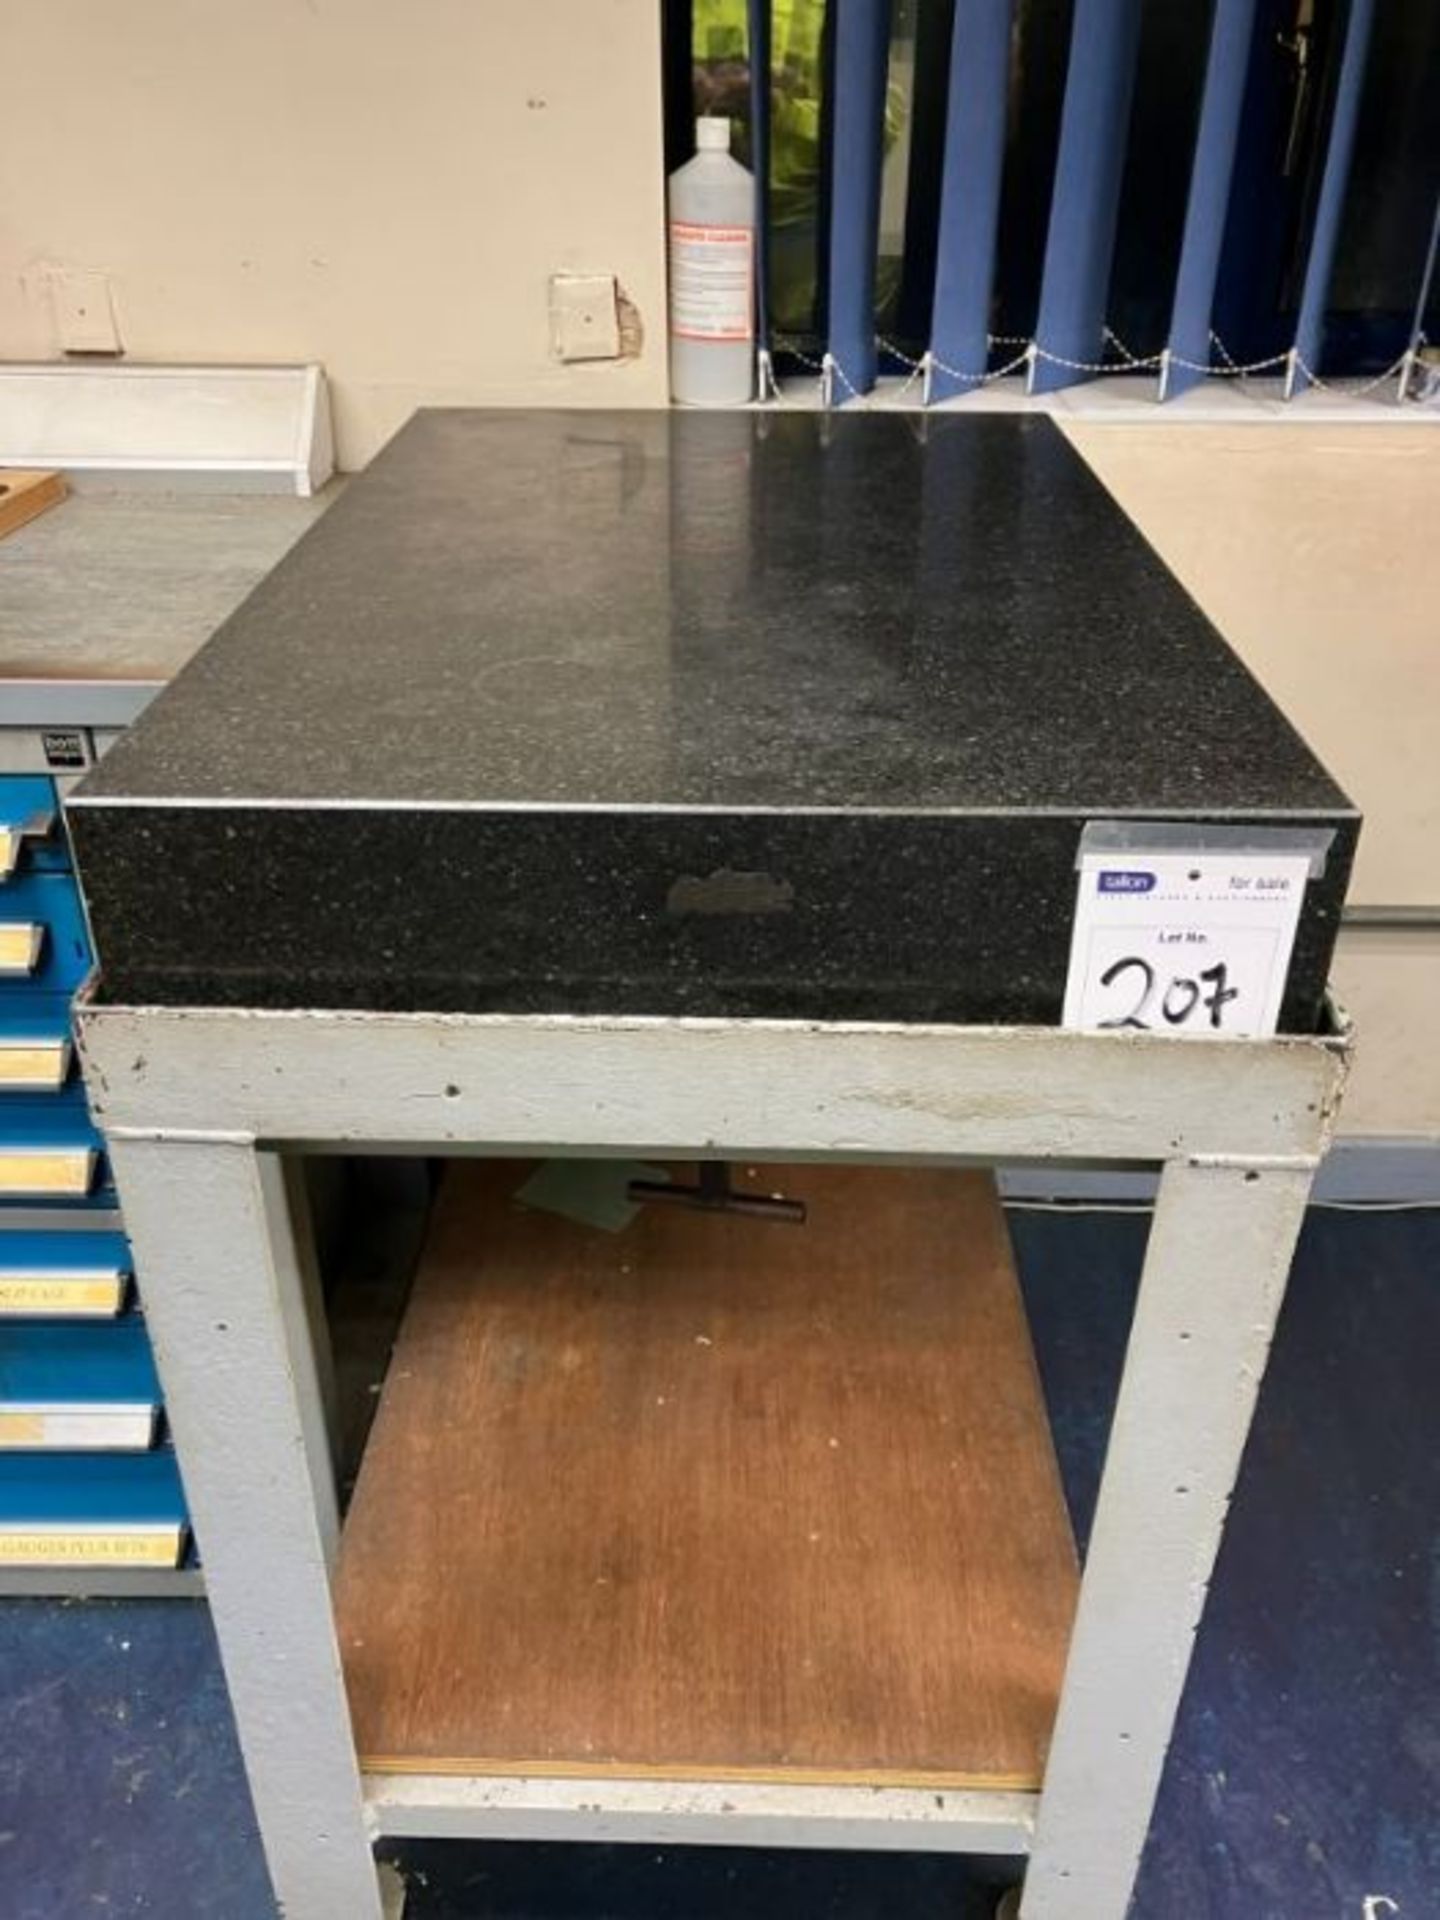 900mm x 600mm granite inspection plate on mount